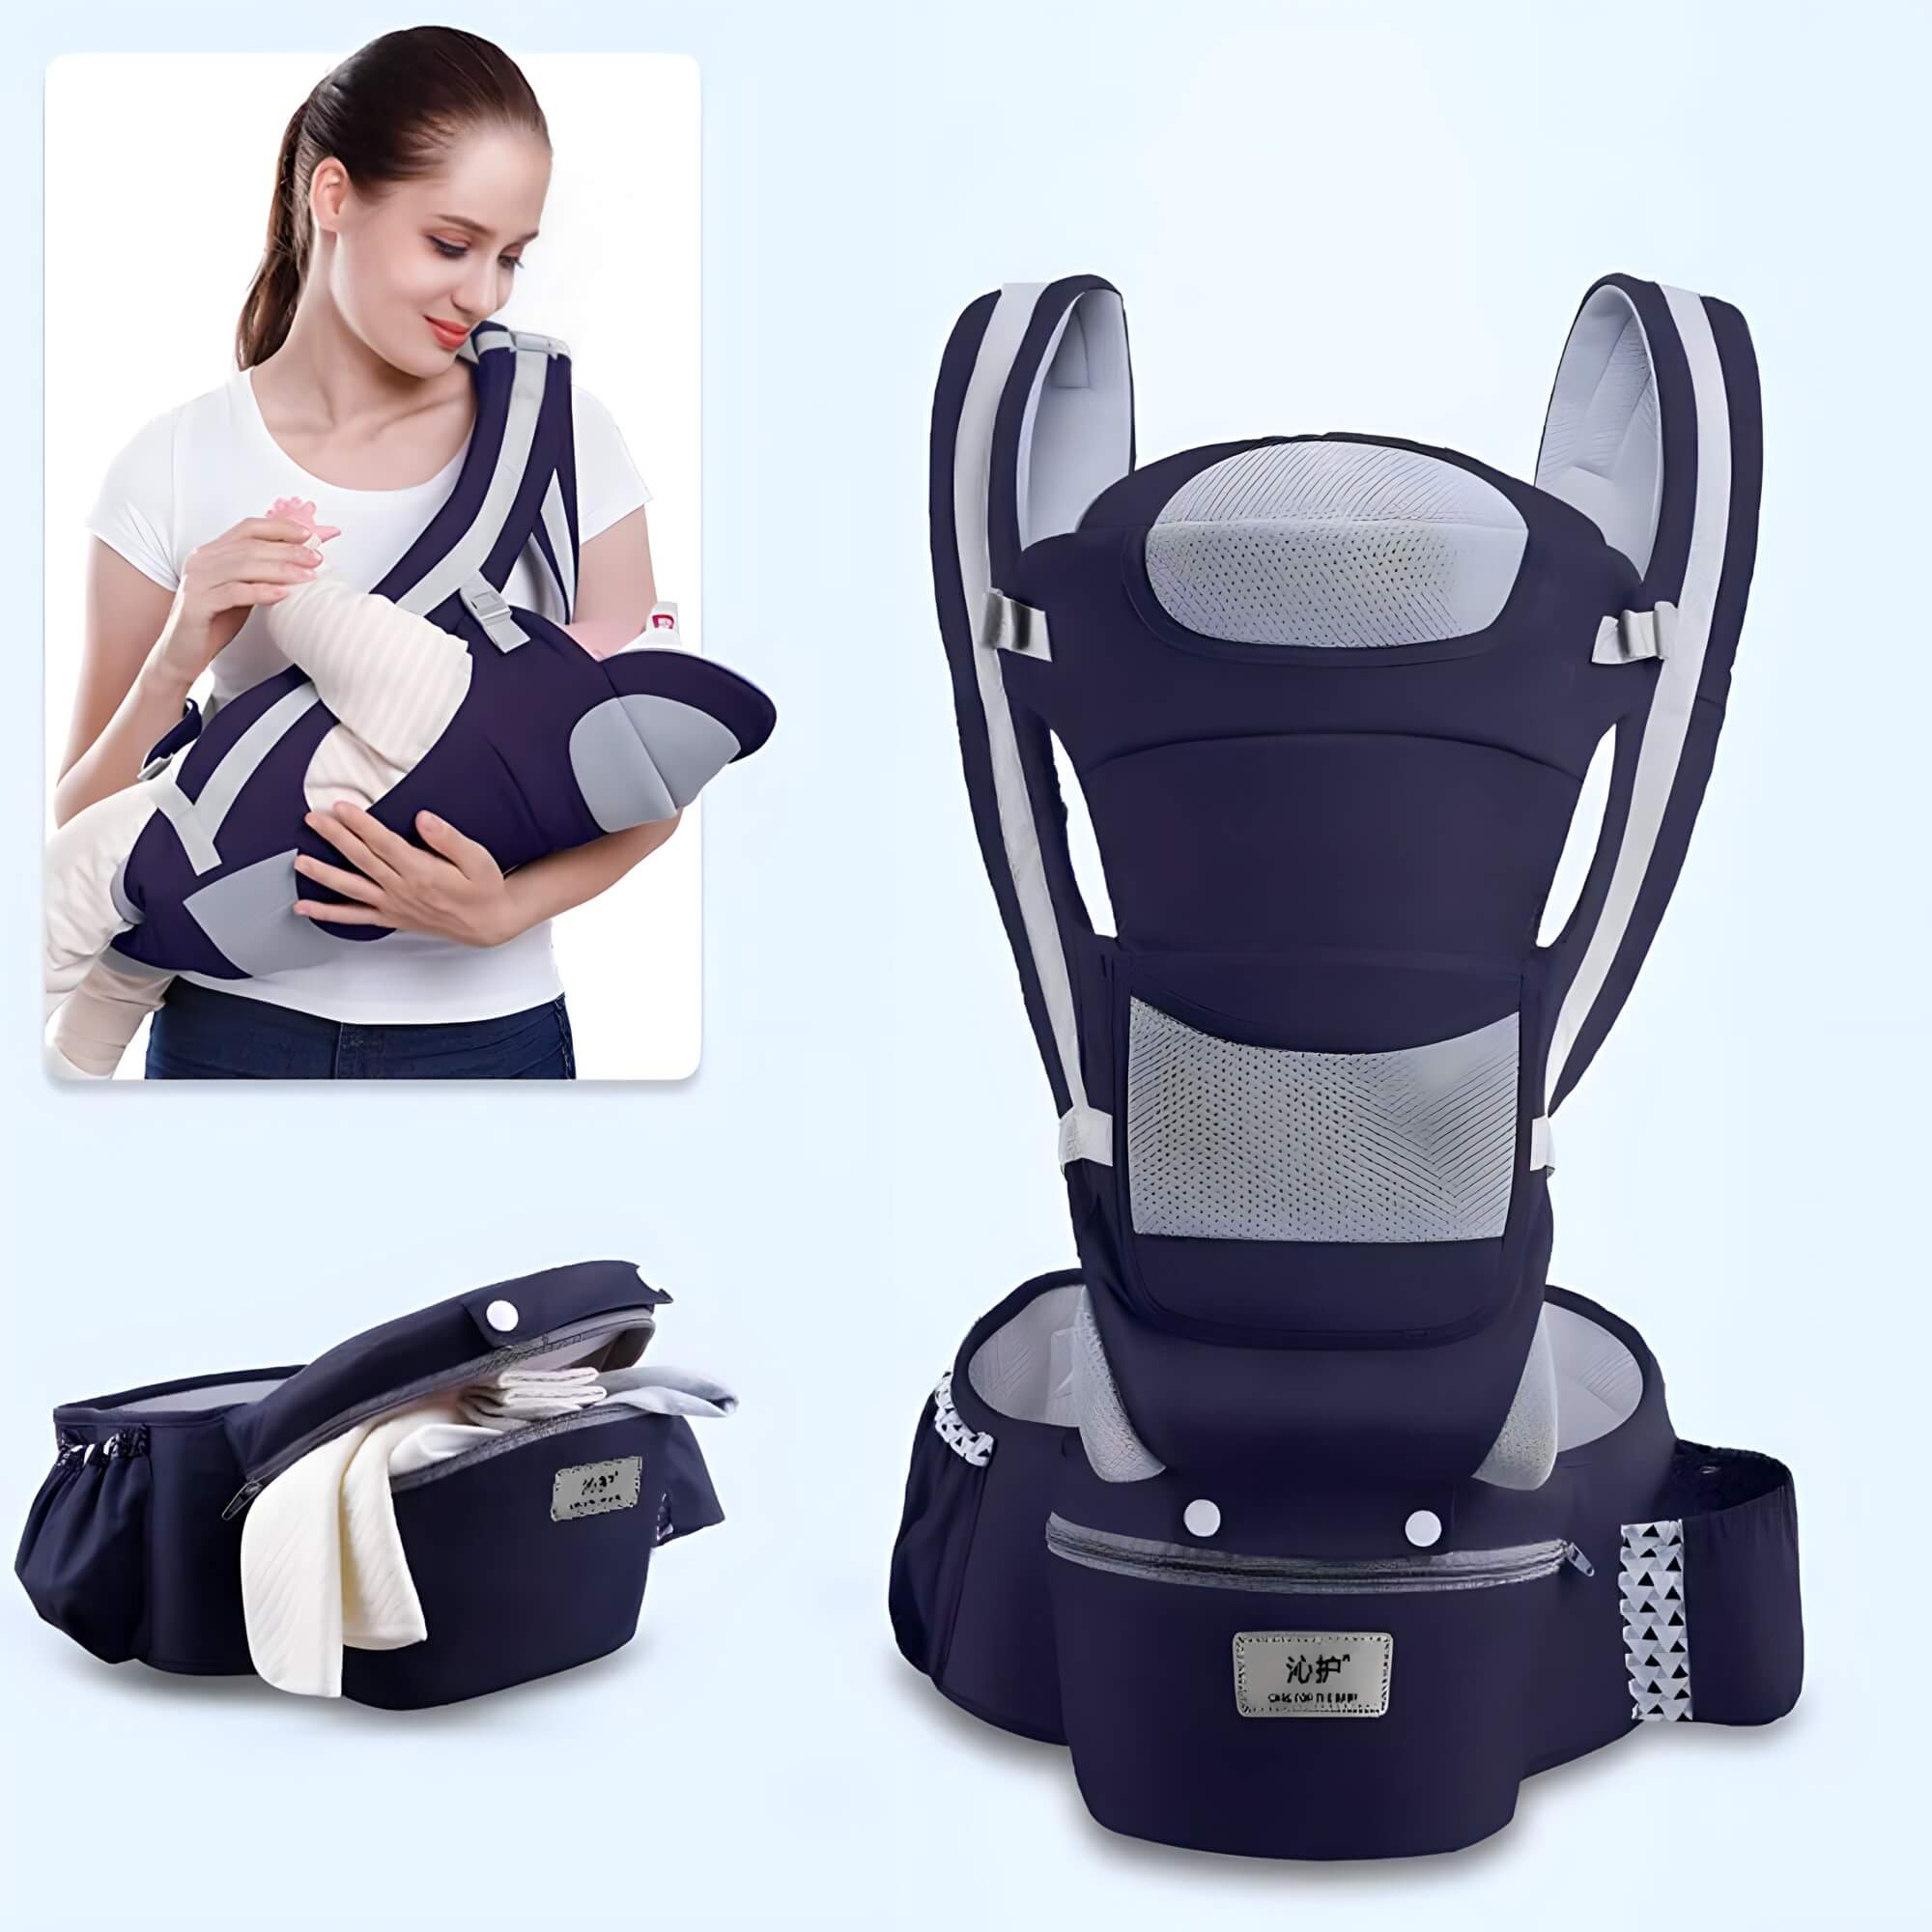 Rockaroo™- The Ultimate 15-in-1 Baby Carrier.